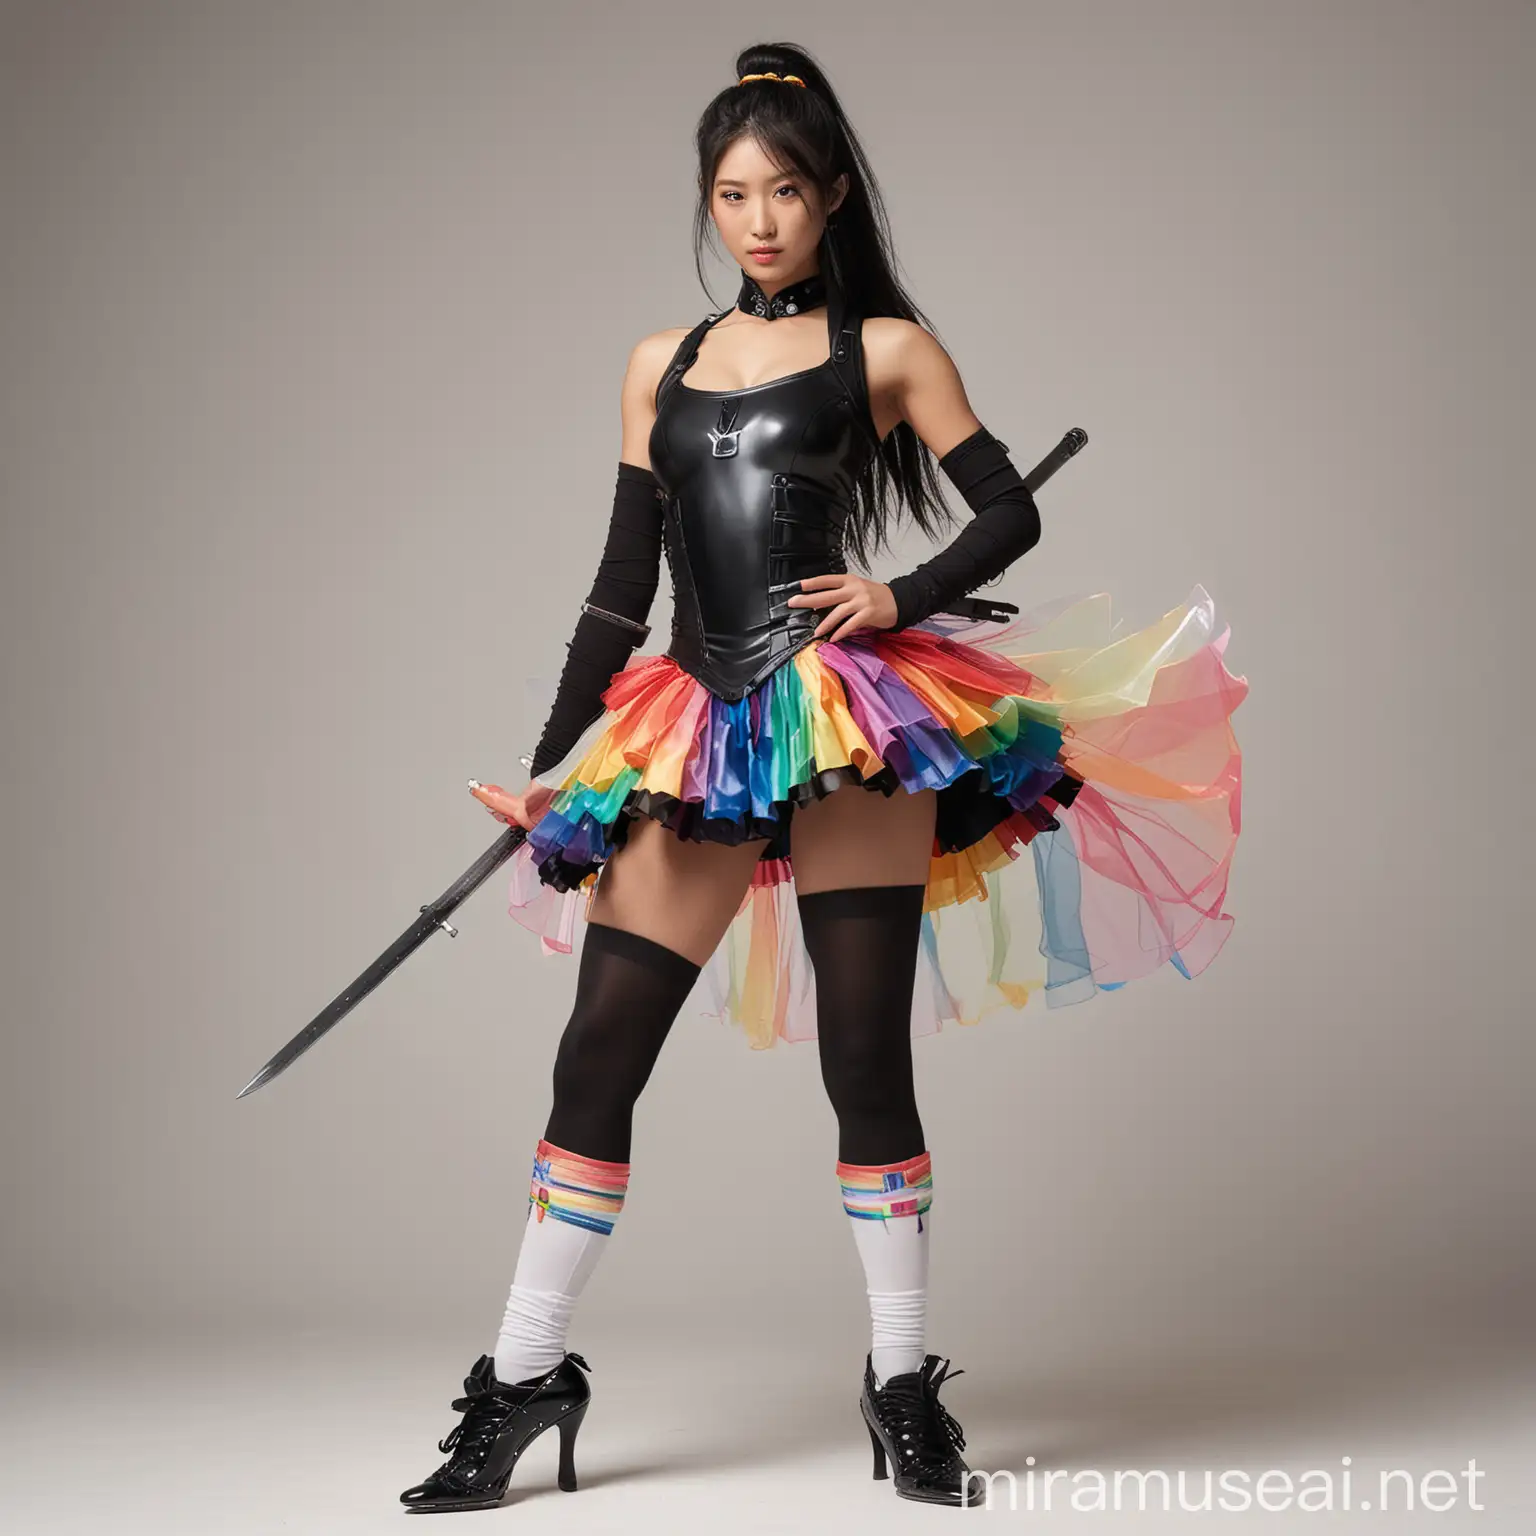 Standing front view, Beautiful toned athletic muscular figure female Japanese supermodel, long black hair, in sleeveless black samurai-knight armor made of metal, bare shoulders, midriff exposed, shoulders exposed, sleeveless, giant rainbow ballerina tutu, rainbow thigh-high socks, white background